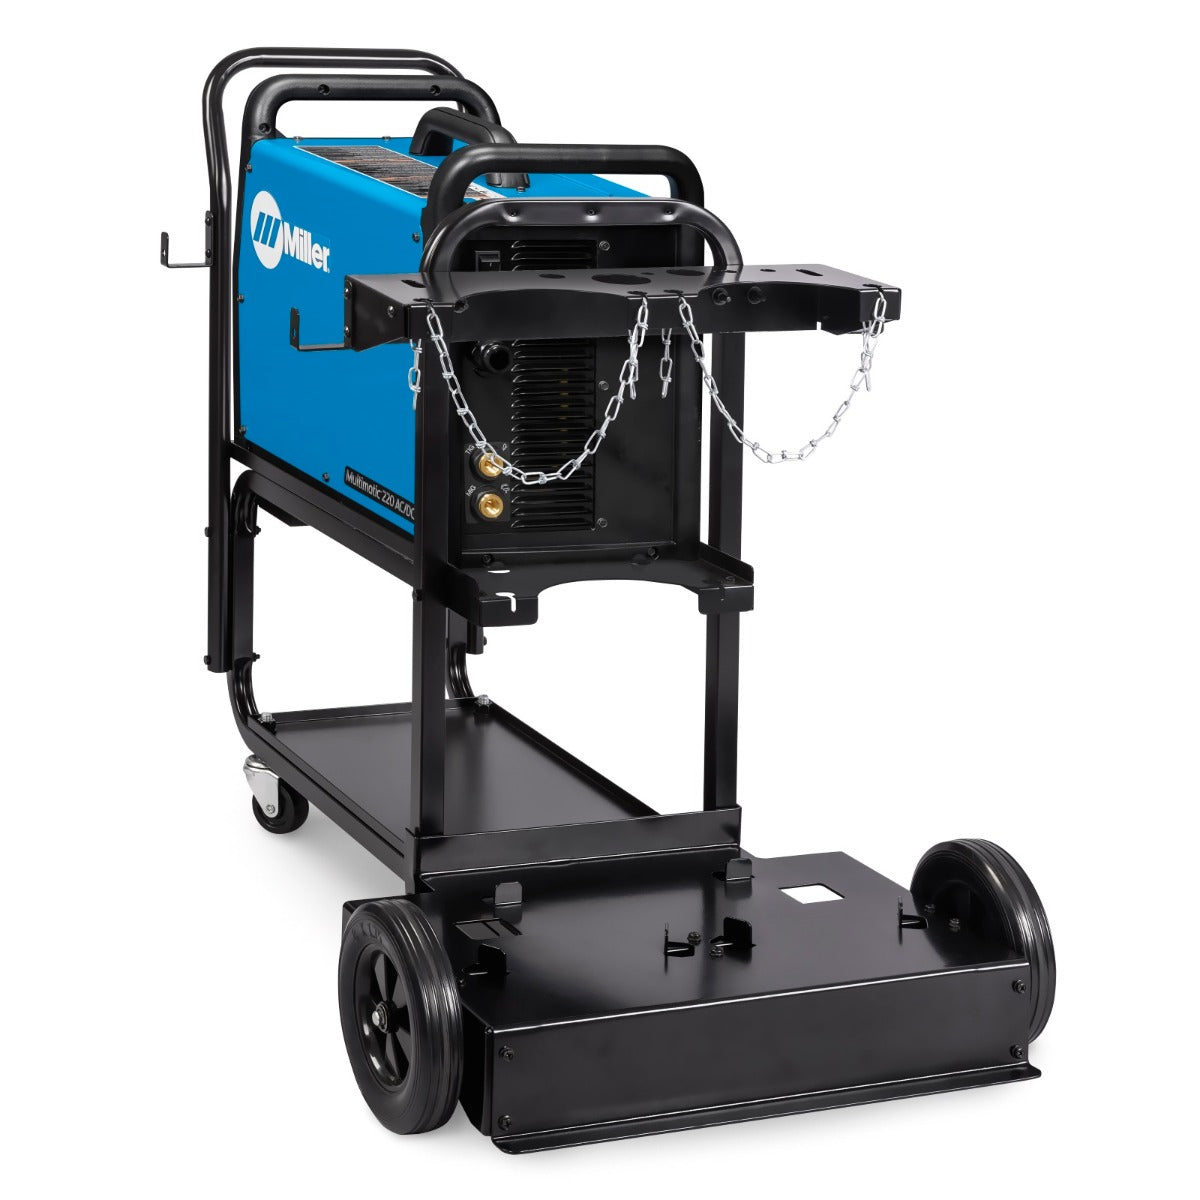 Miller Multimatic Dual Cylinder Rack and Cart (951770)